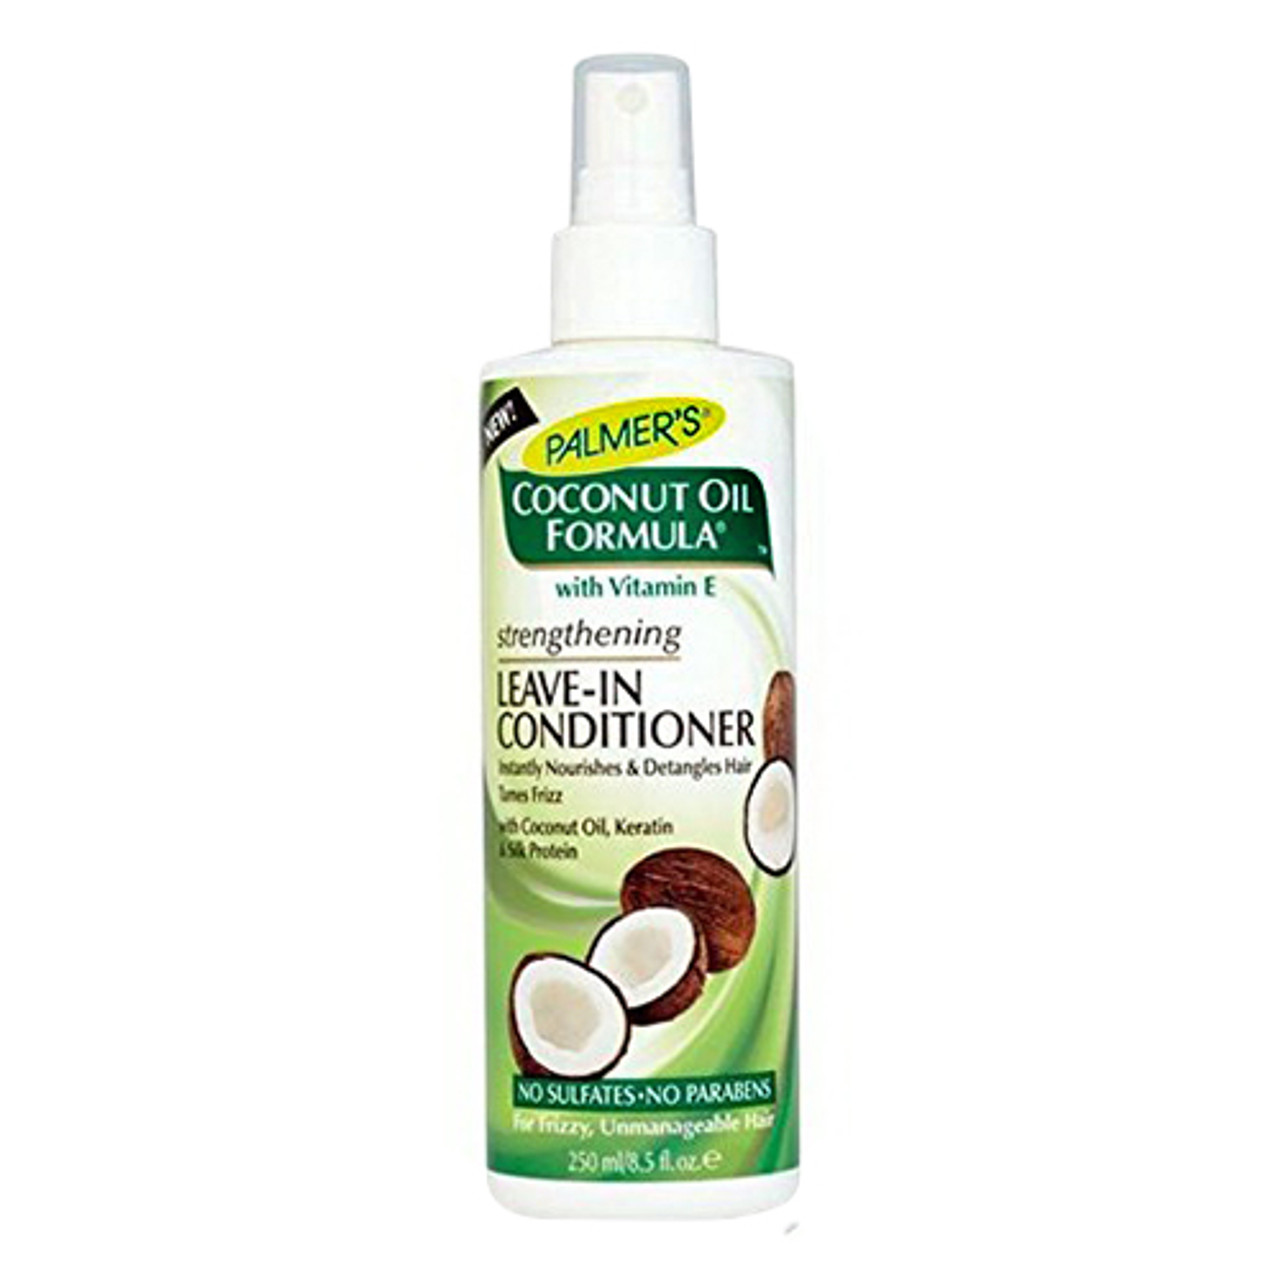 Palmers Coconut Oil Formula Strengthening Leave-in Conditioner, 8.5 Oz -  myotcstore.com